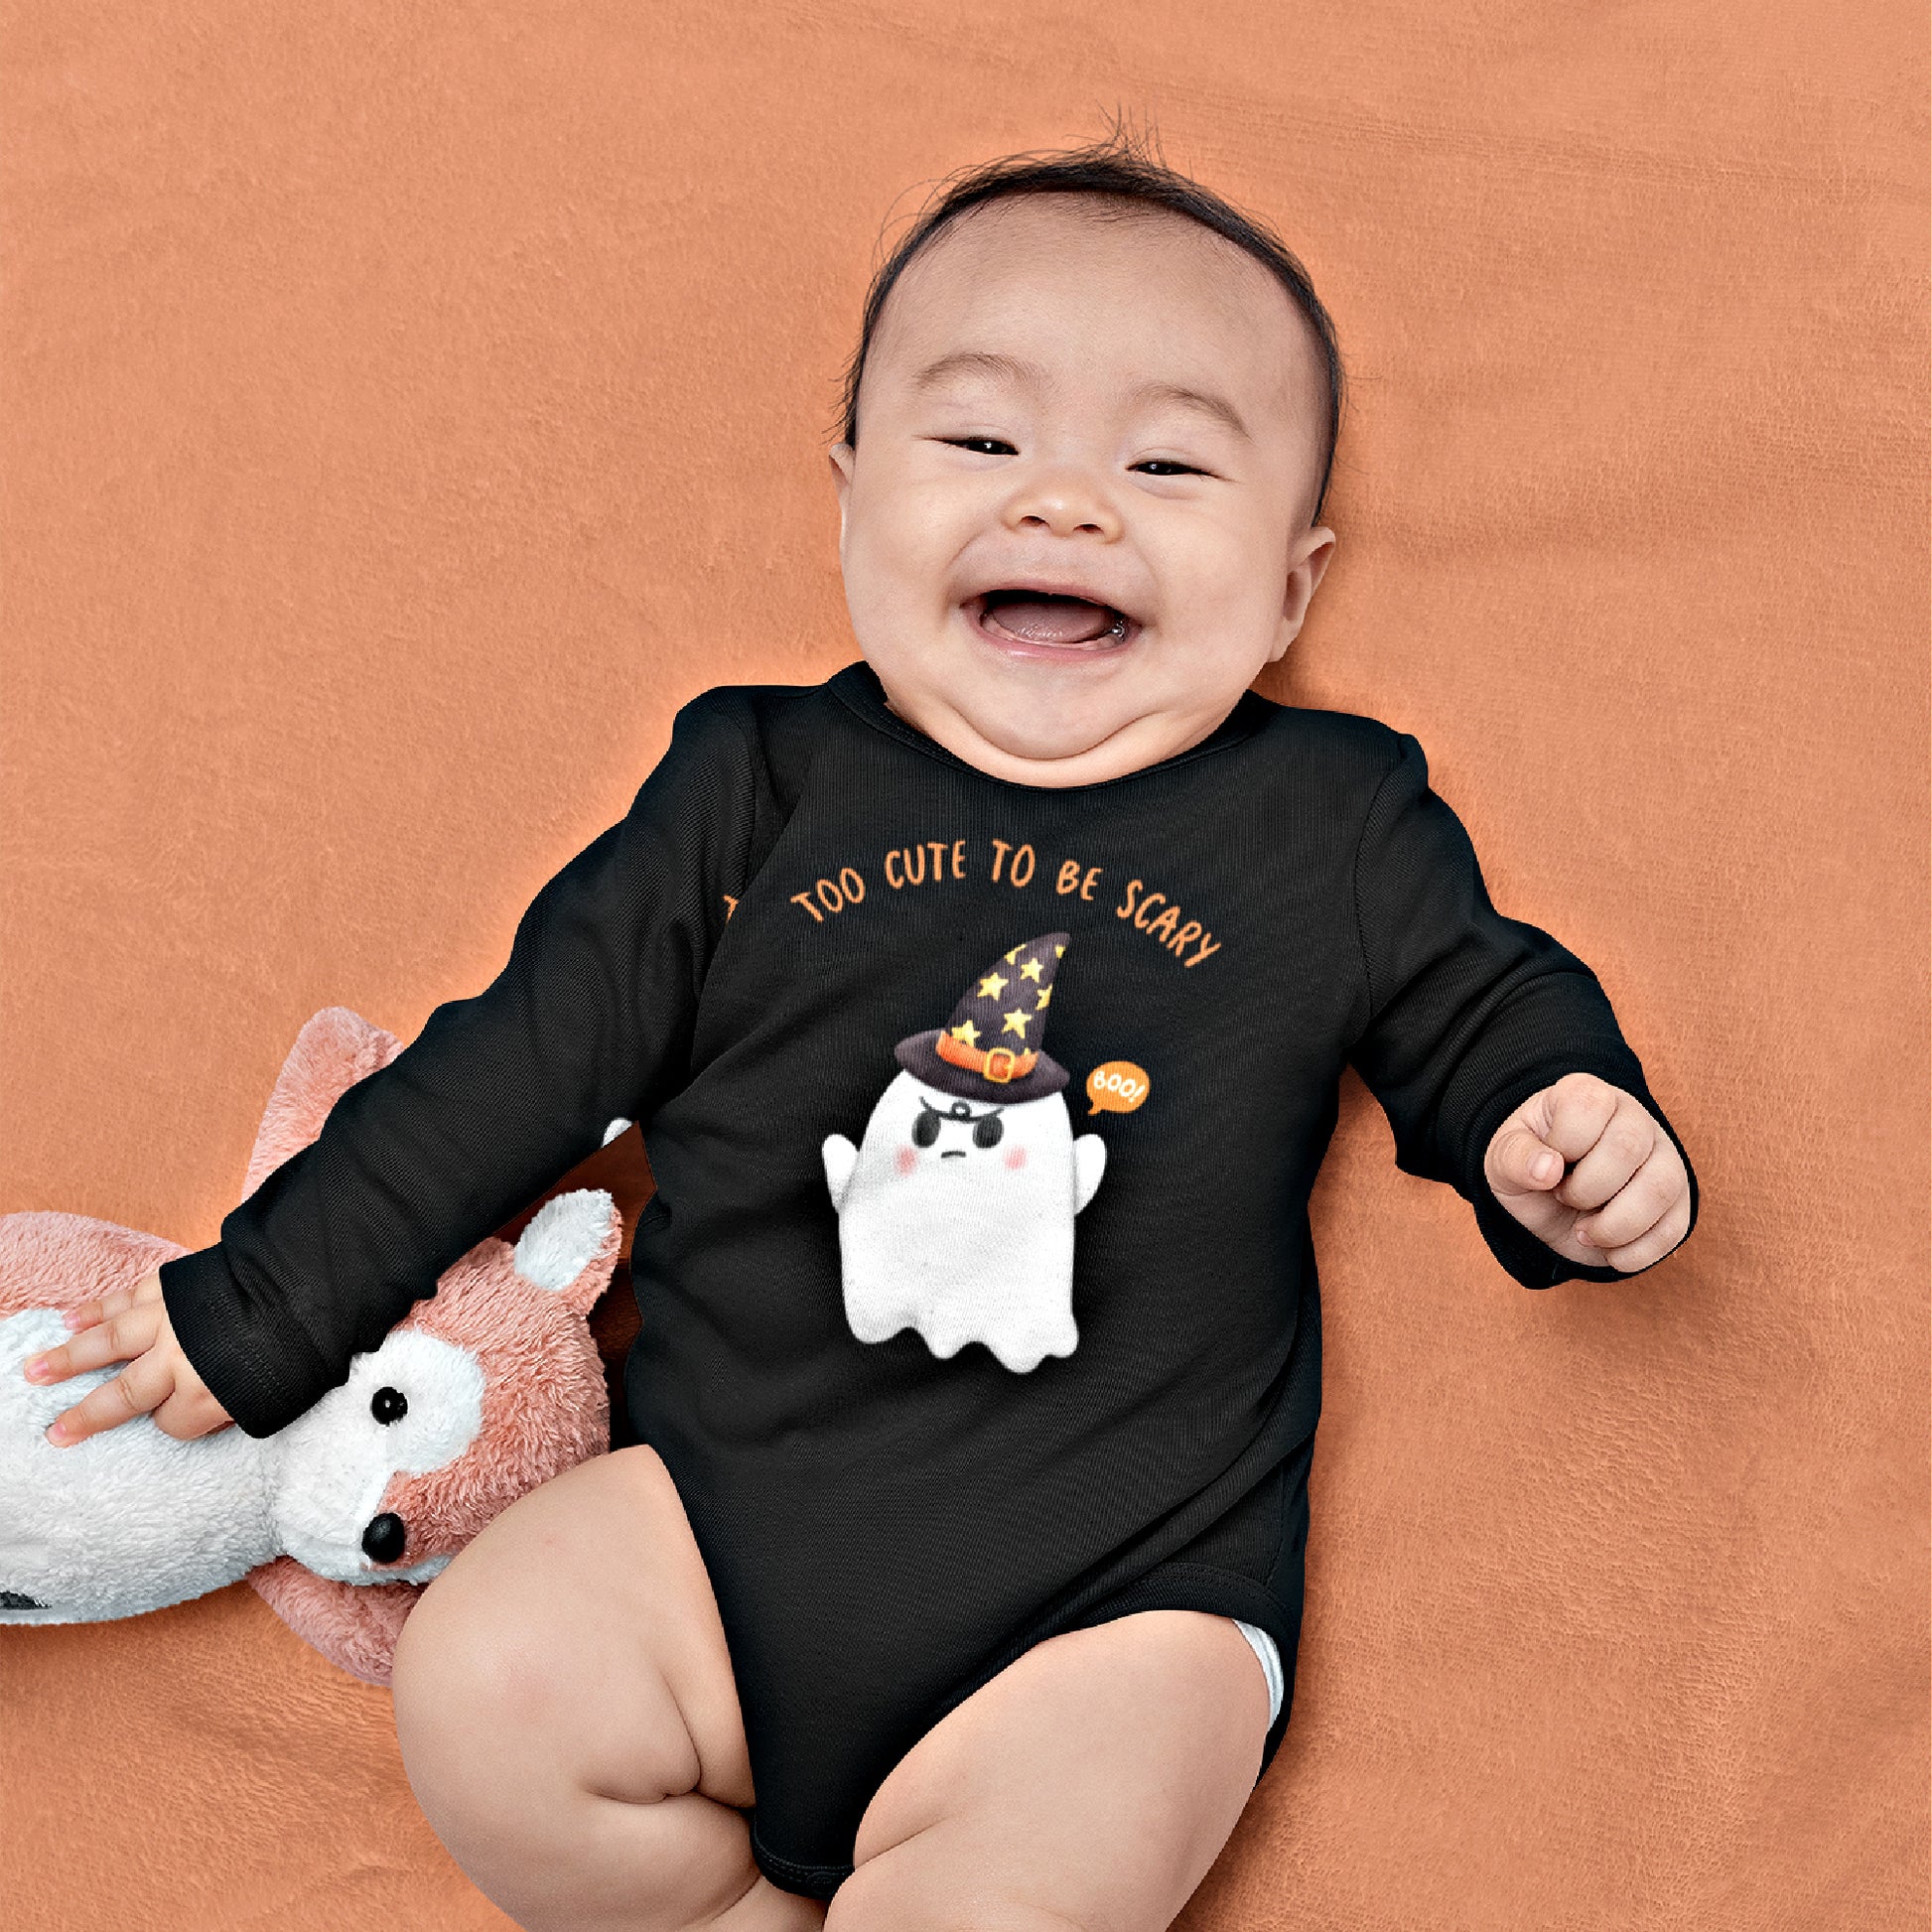 Mock up of a cheerful baby wearing the Black 'onsie'